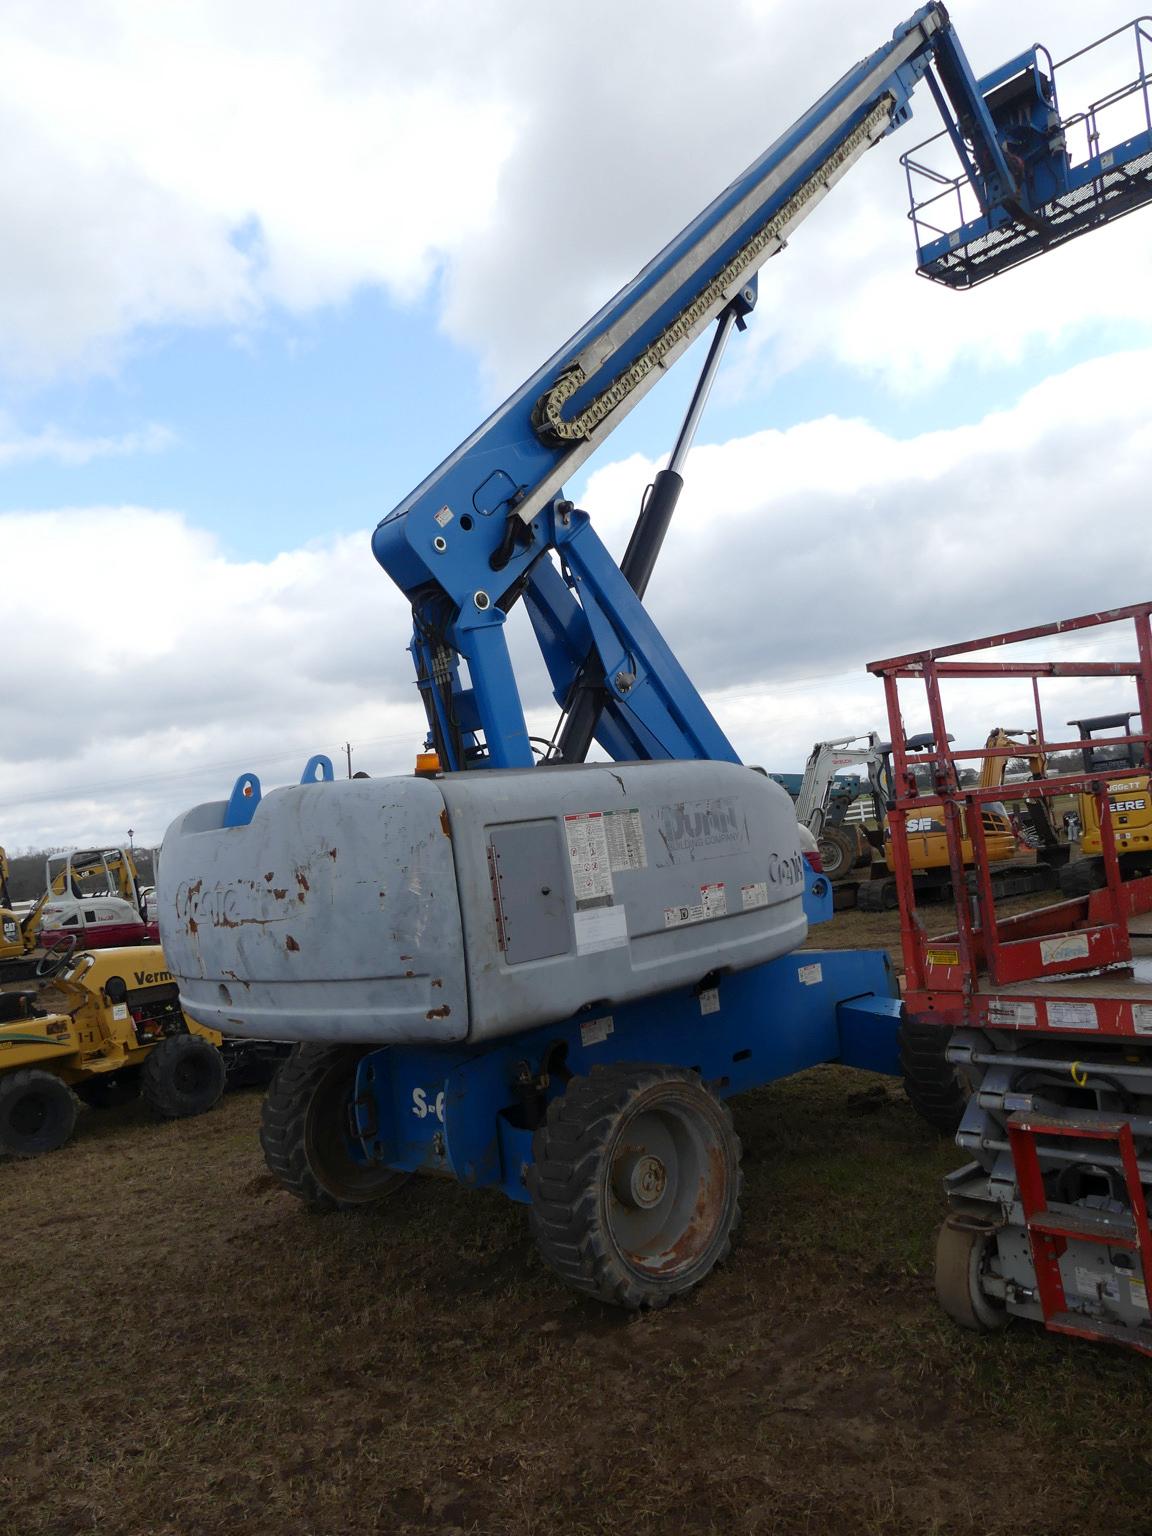 Genie S65 Manlift, sn S6013-25315: Welder Ready, Meter Shows 3518 hrs